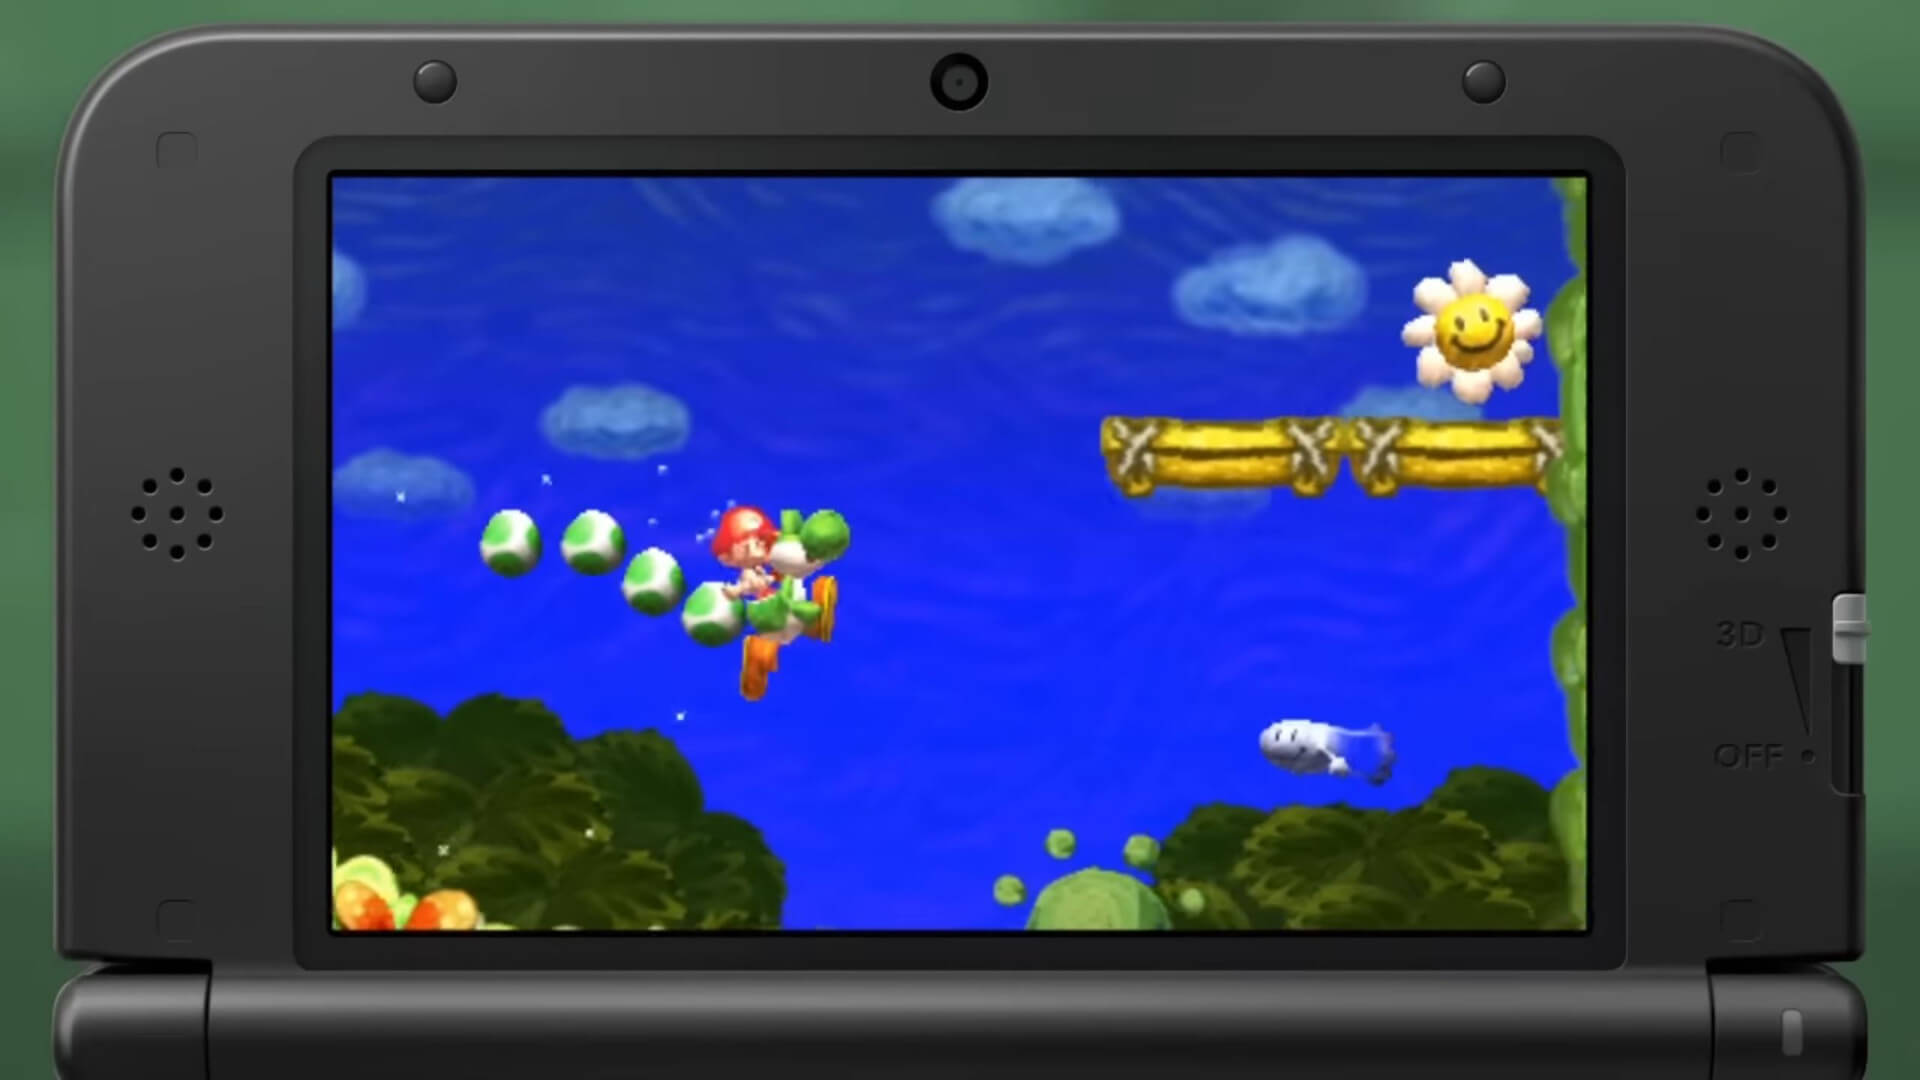 Yoshi leaping up towards a platform to collect a flower in Yoshi's New Island on 3DS